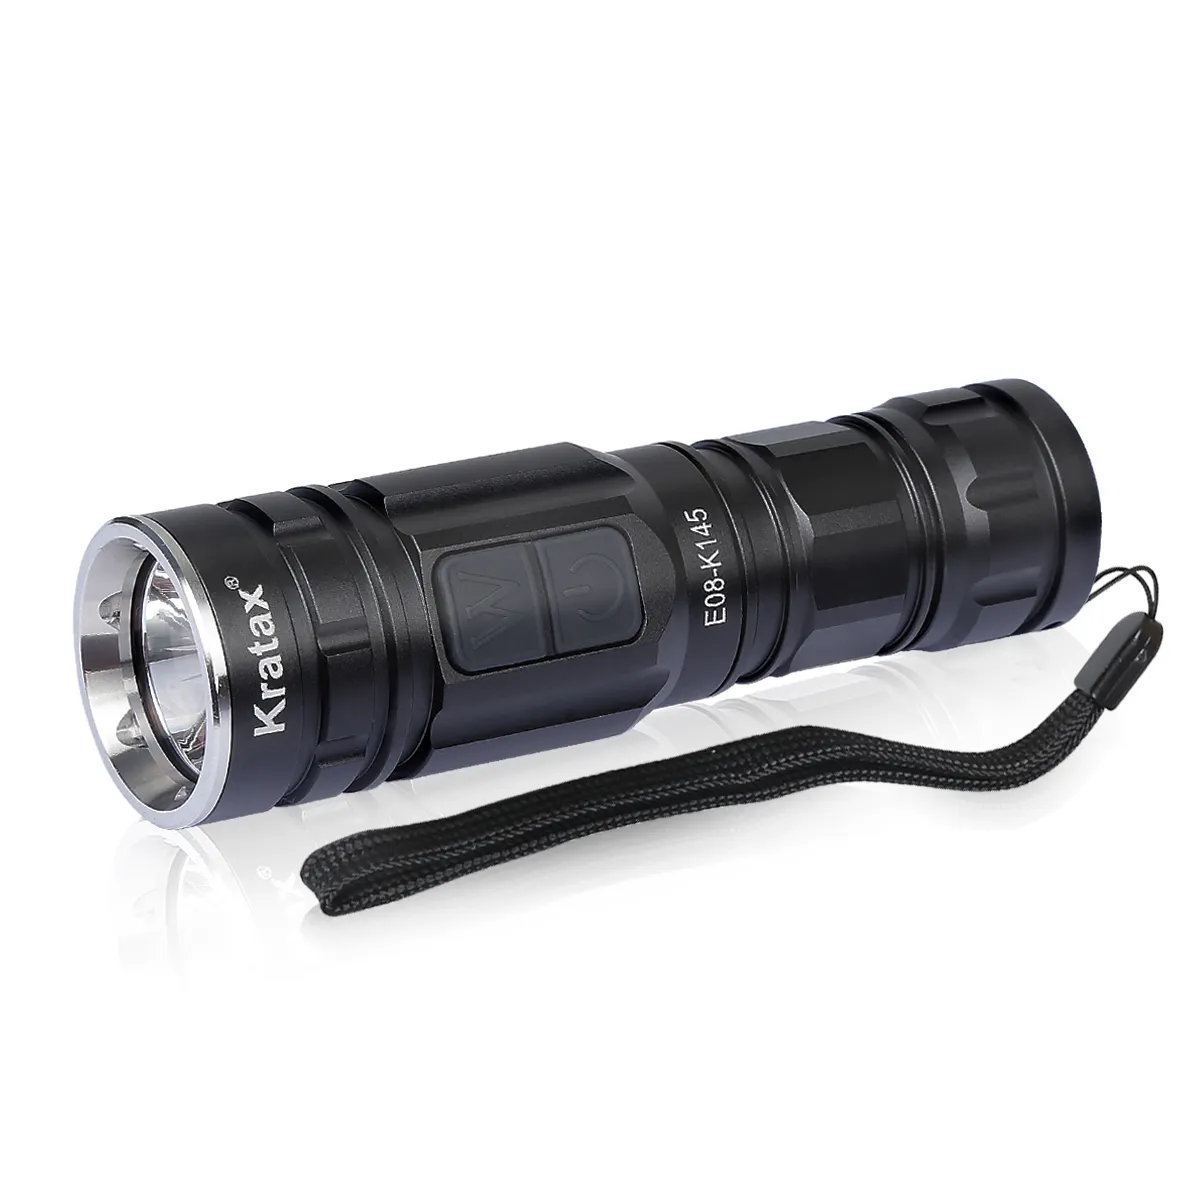 Handheld Rechargeable LED Flashlight 7 Modes Super Bright 600 Lumens Pocket Torch IPX7 Waterproof Camping Outdoor Torch